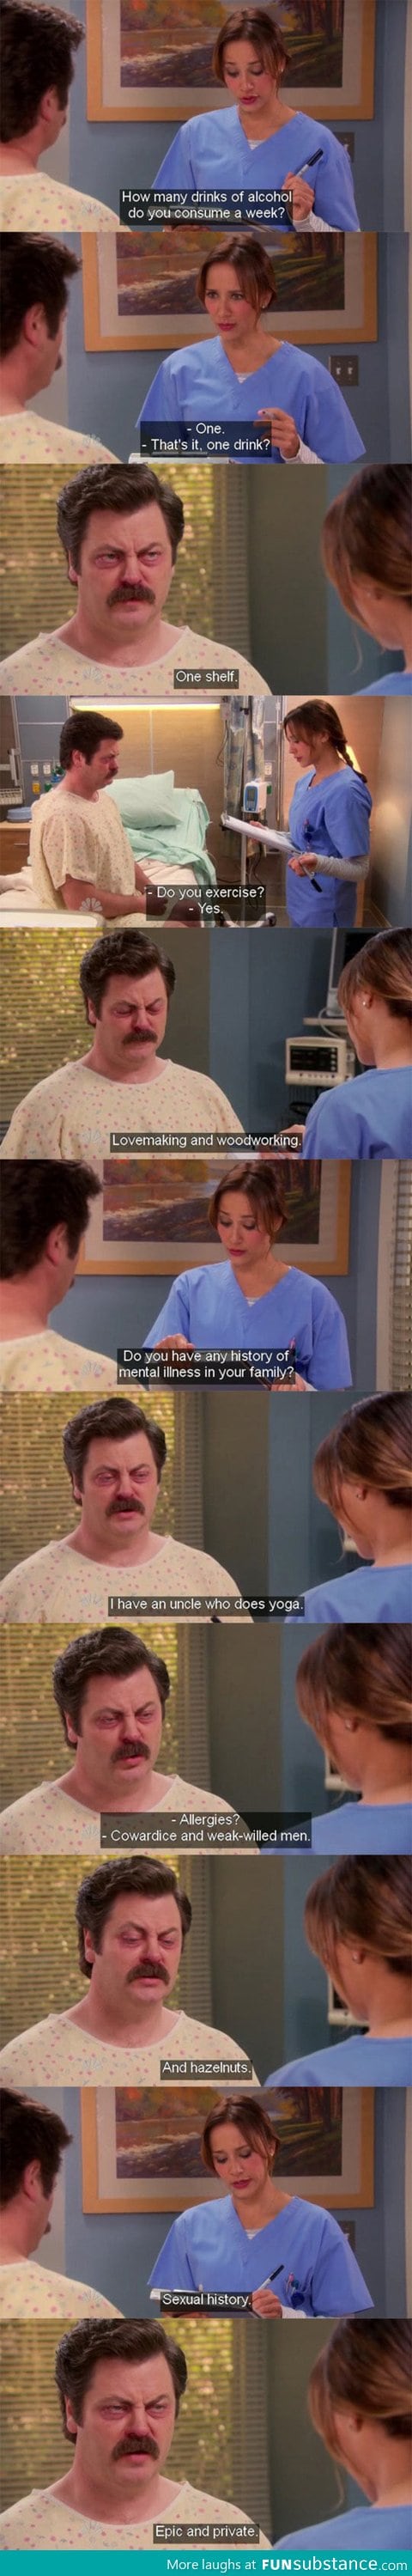 Ron Swanson at his best